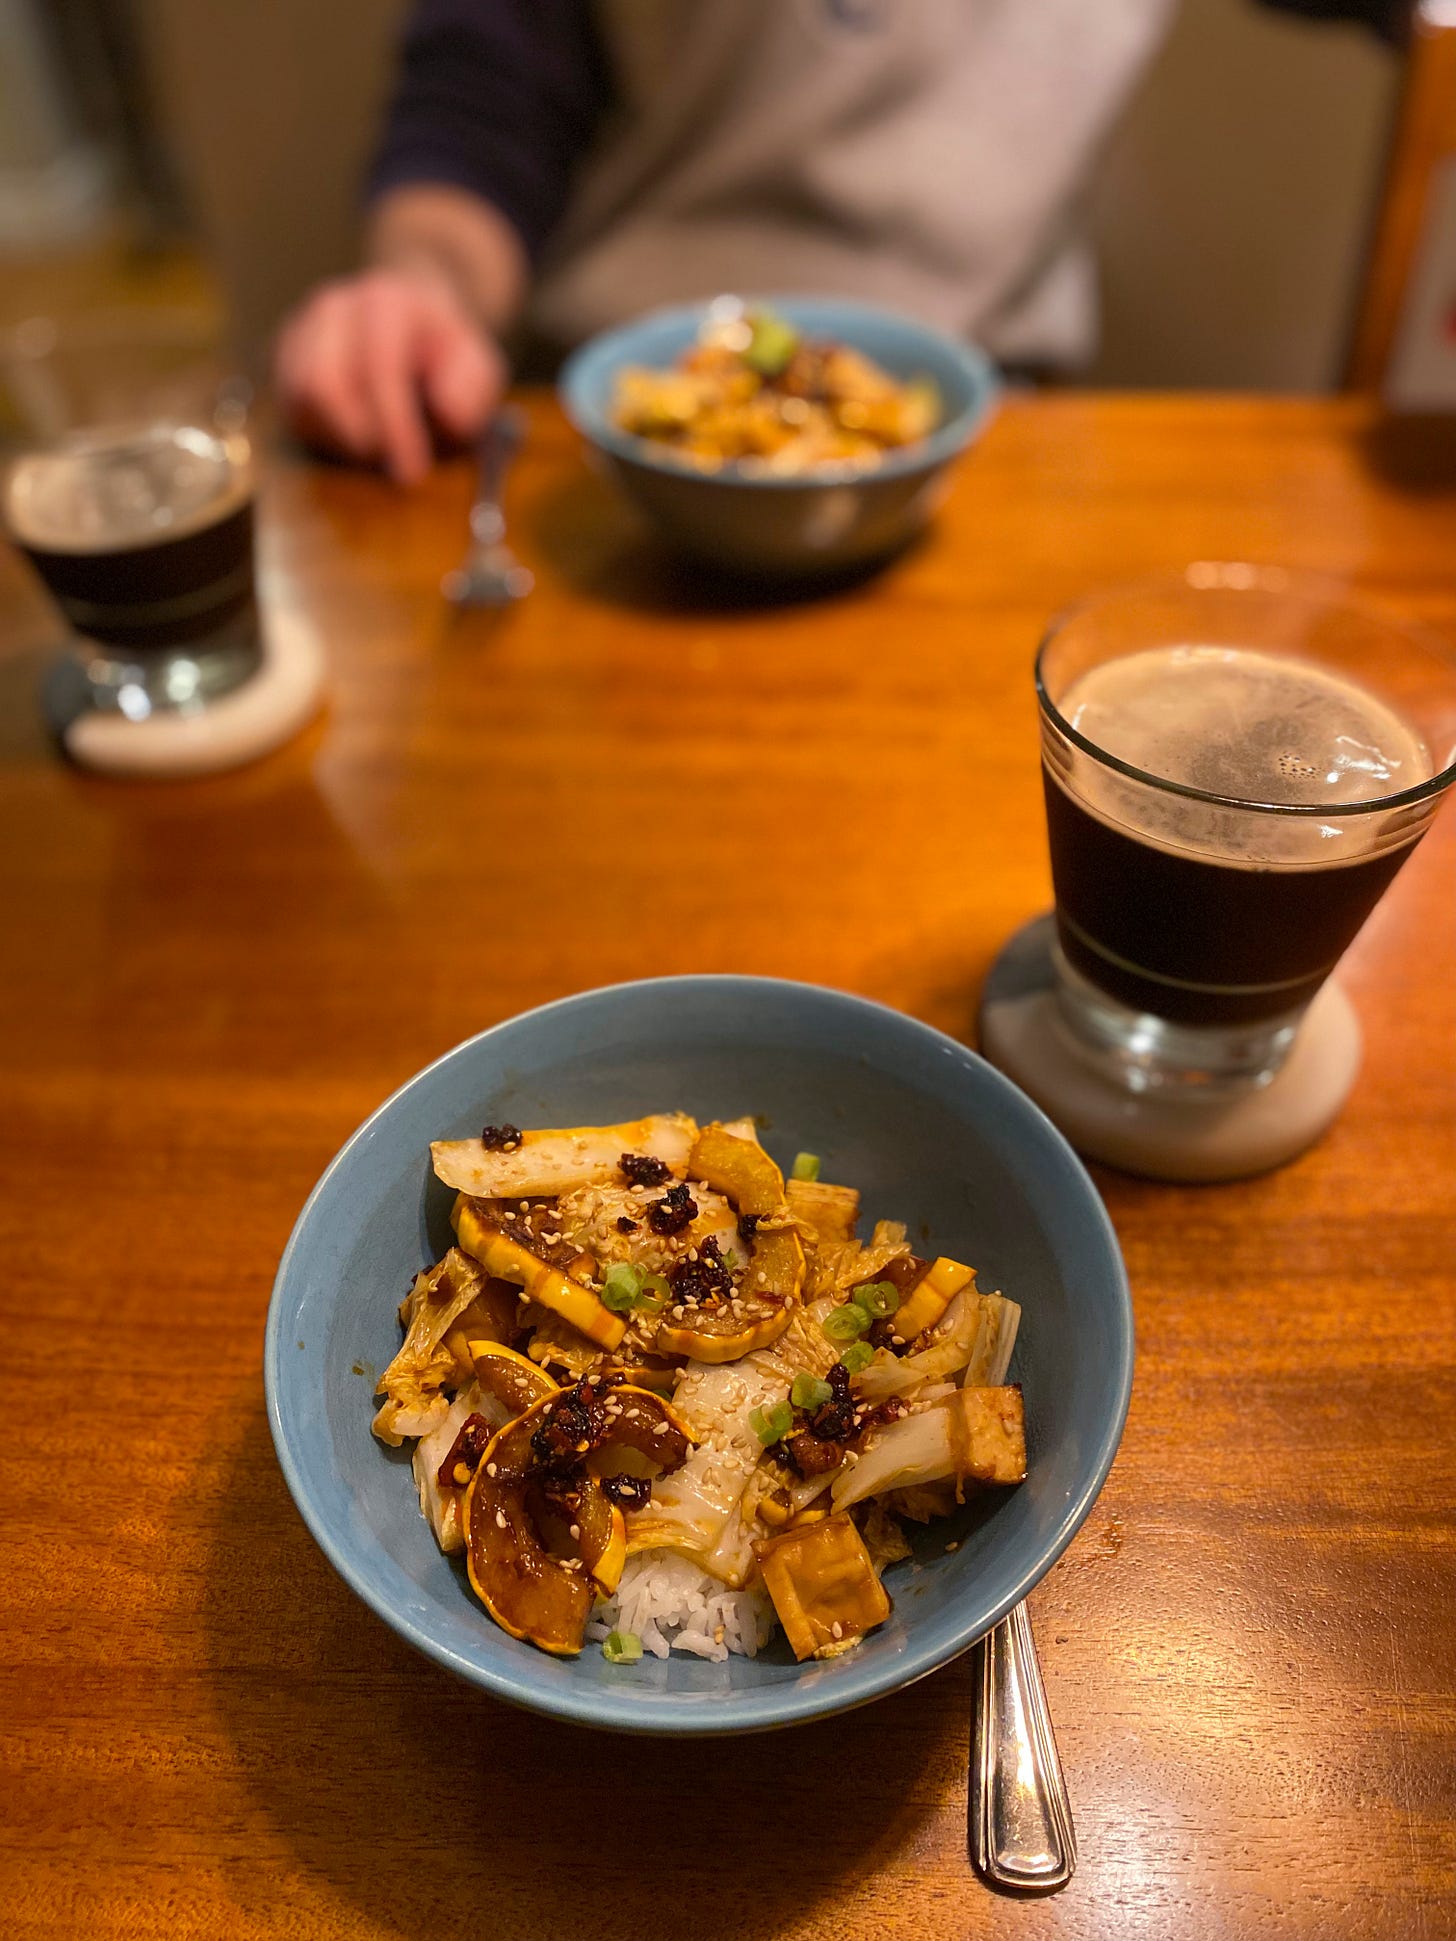 Two blue bowls of rice with braised squash slices, pieces of napa cabbage, and cubes of tofu in hoisin glaze. On top is chili crisp and sesame seeds, and two glasses of dark beer rest on coasters beside the bowls.